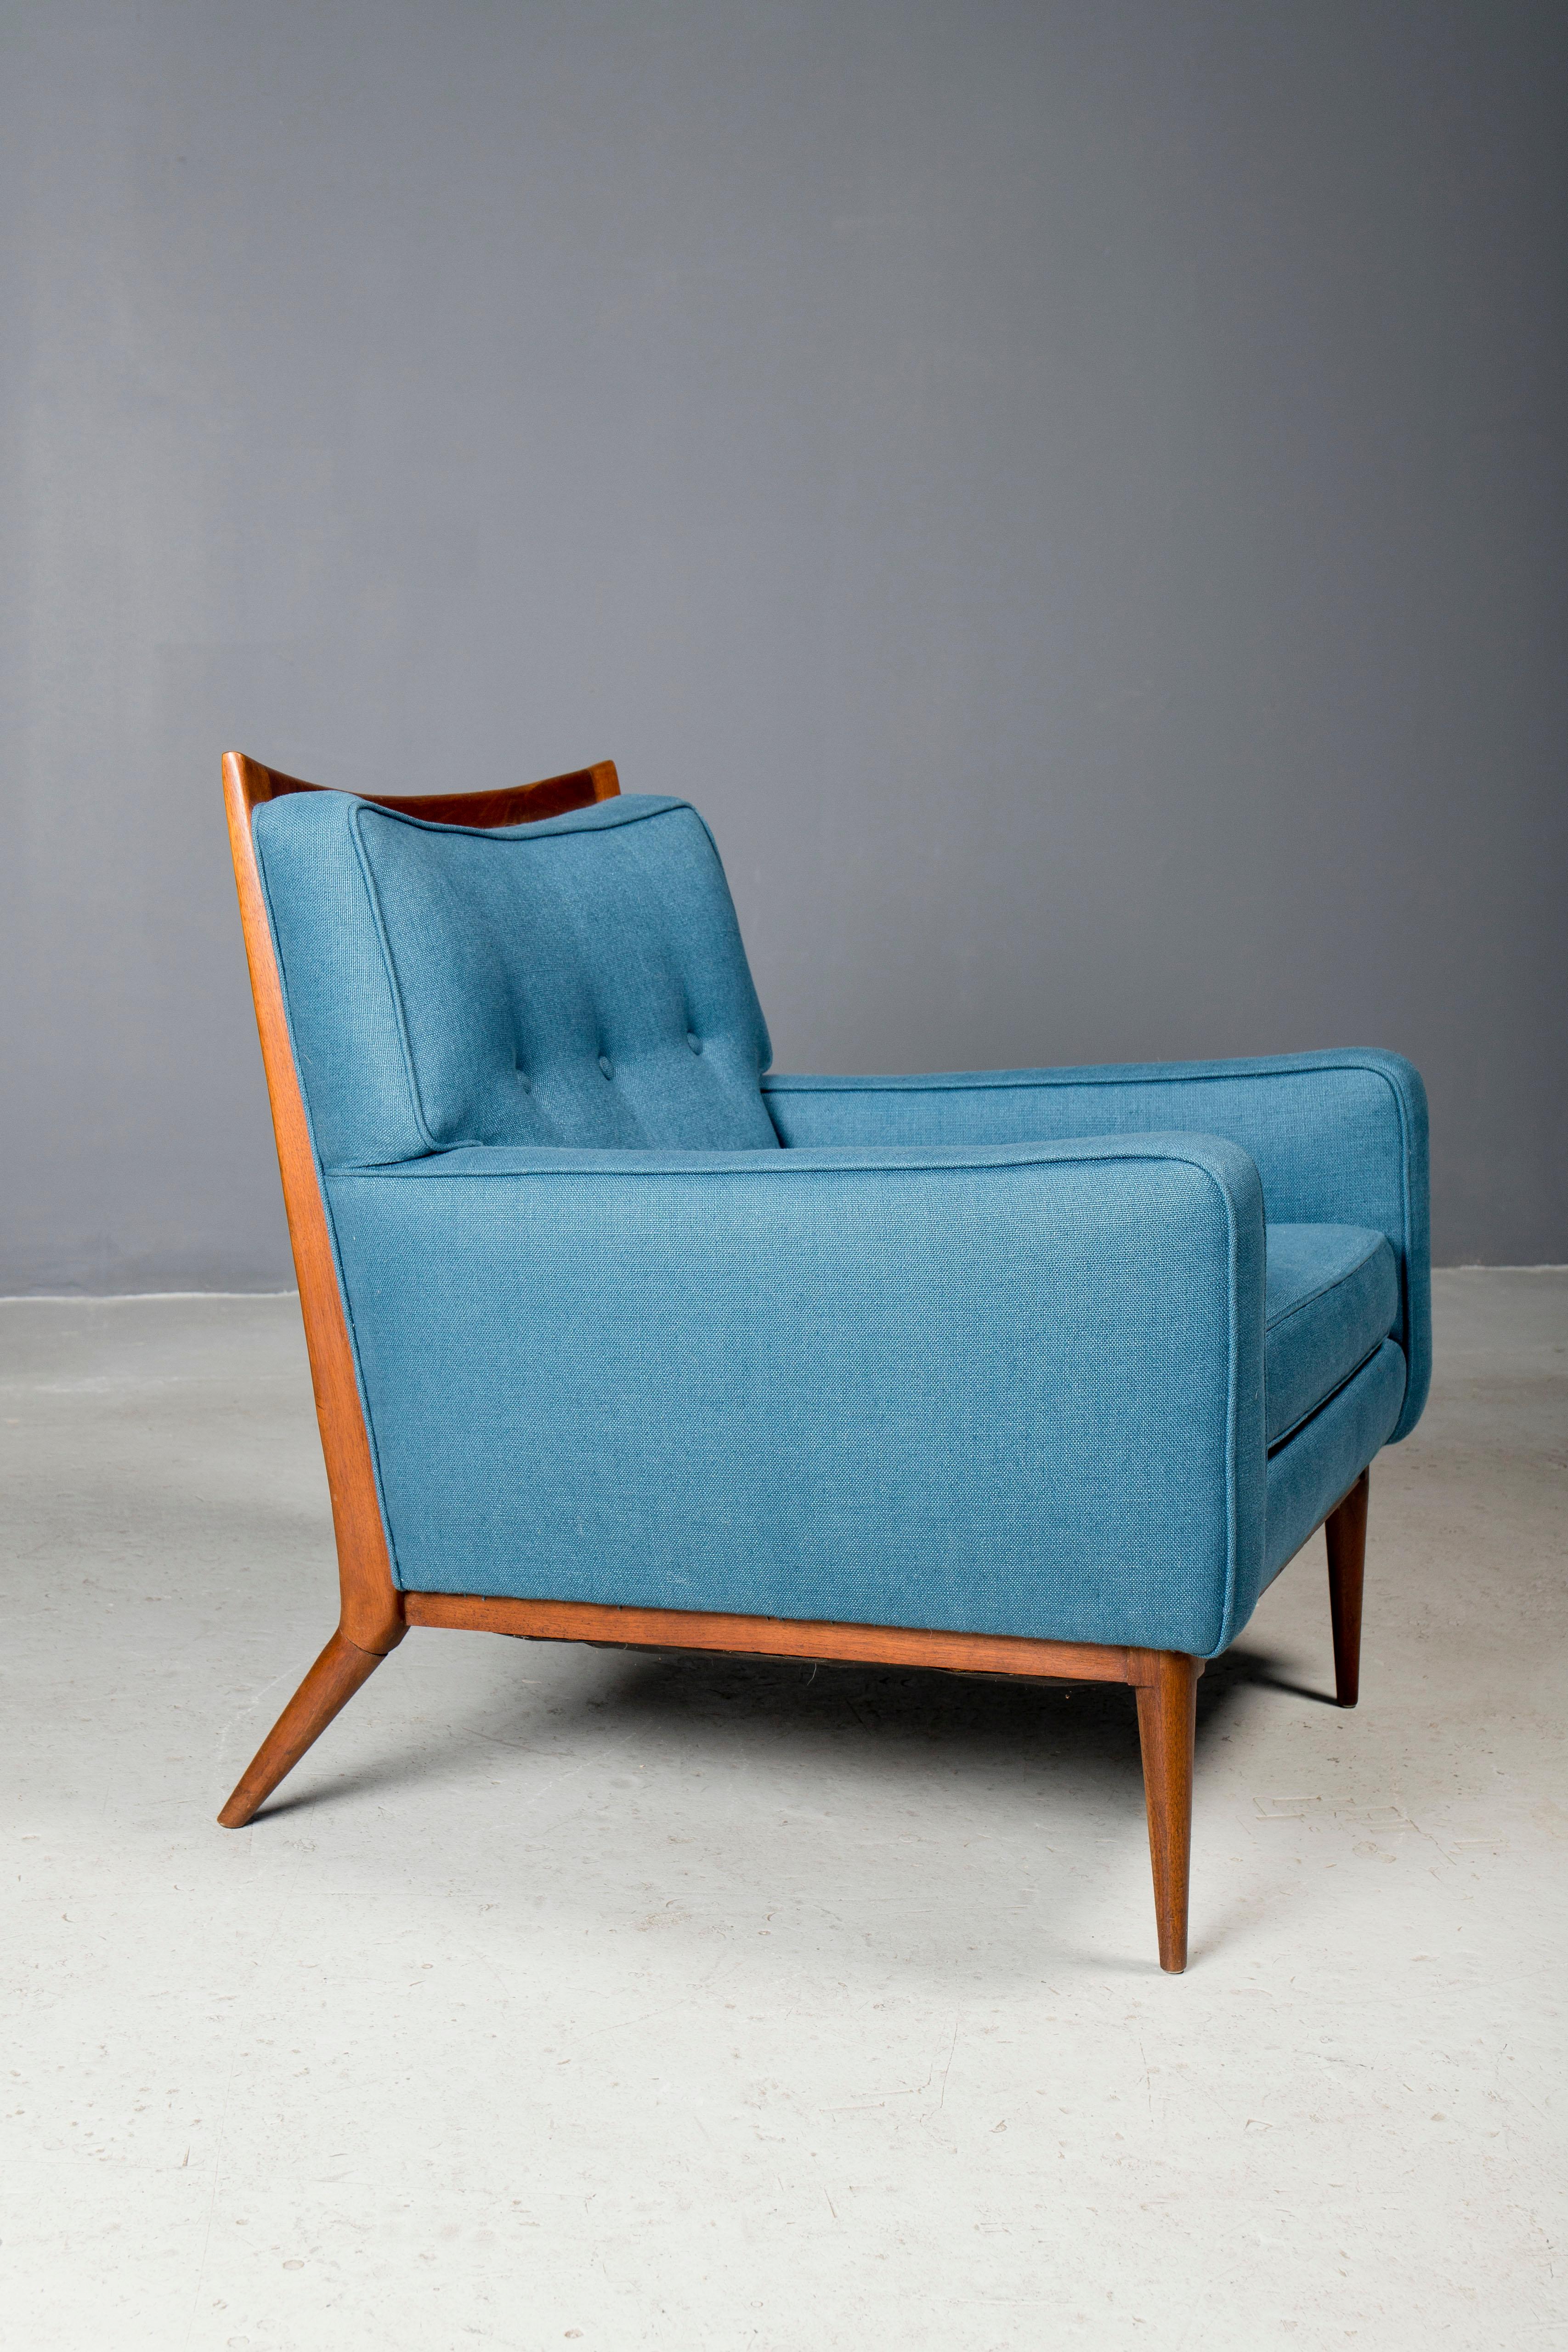 North American Paul McCobb Lounge Chair, 1950's For Sale